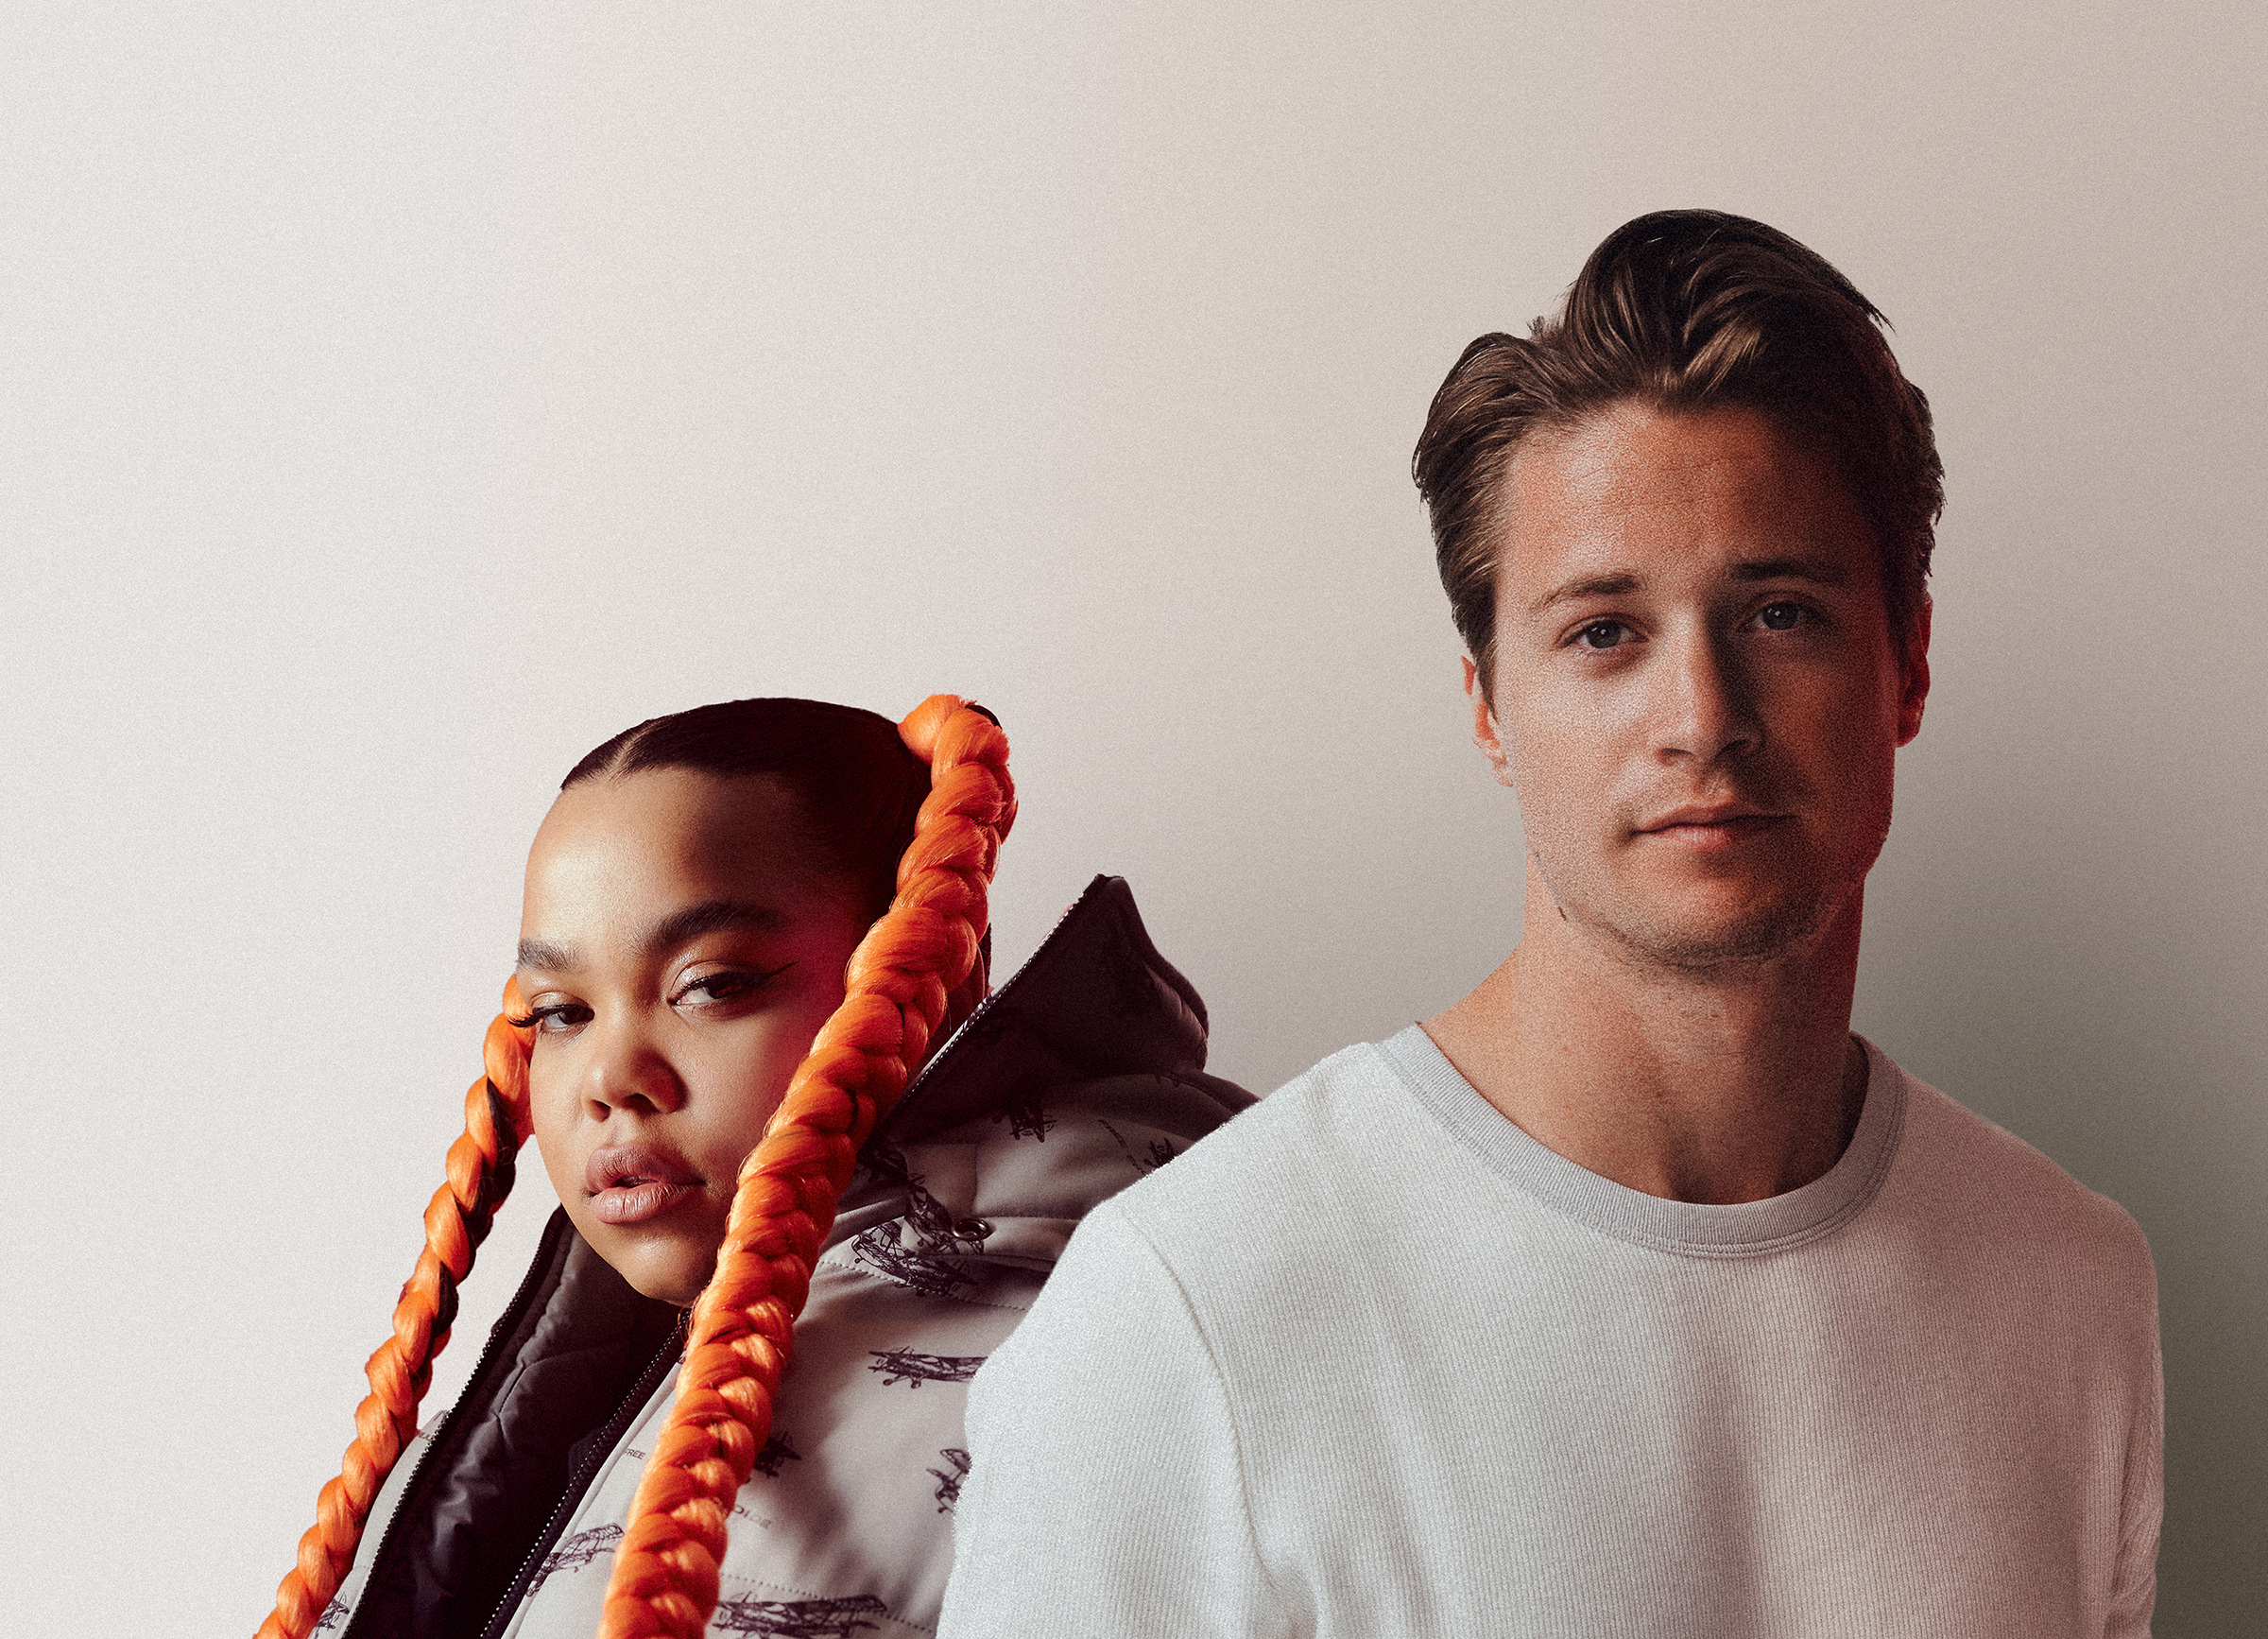 Global superstar, producer and DJ, KYGO releases his new song 'Love Me Now' ft. Zoe Wees 